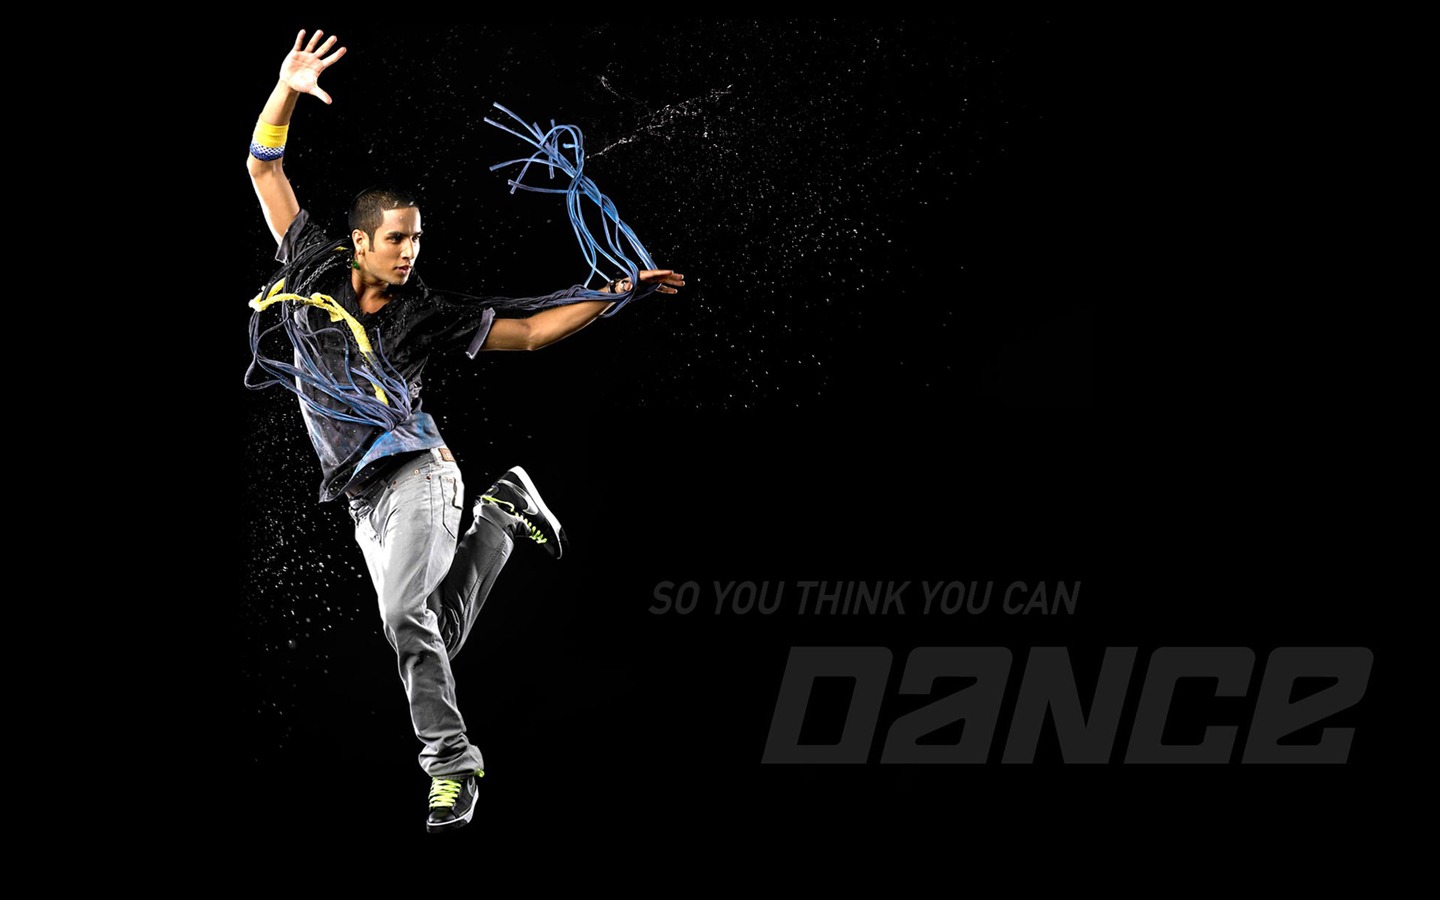 So You Think You Can Dance Wallpaper (1) #4 - 1440x900